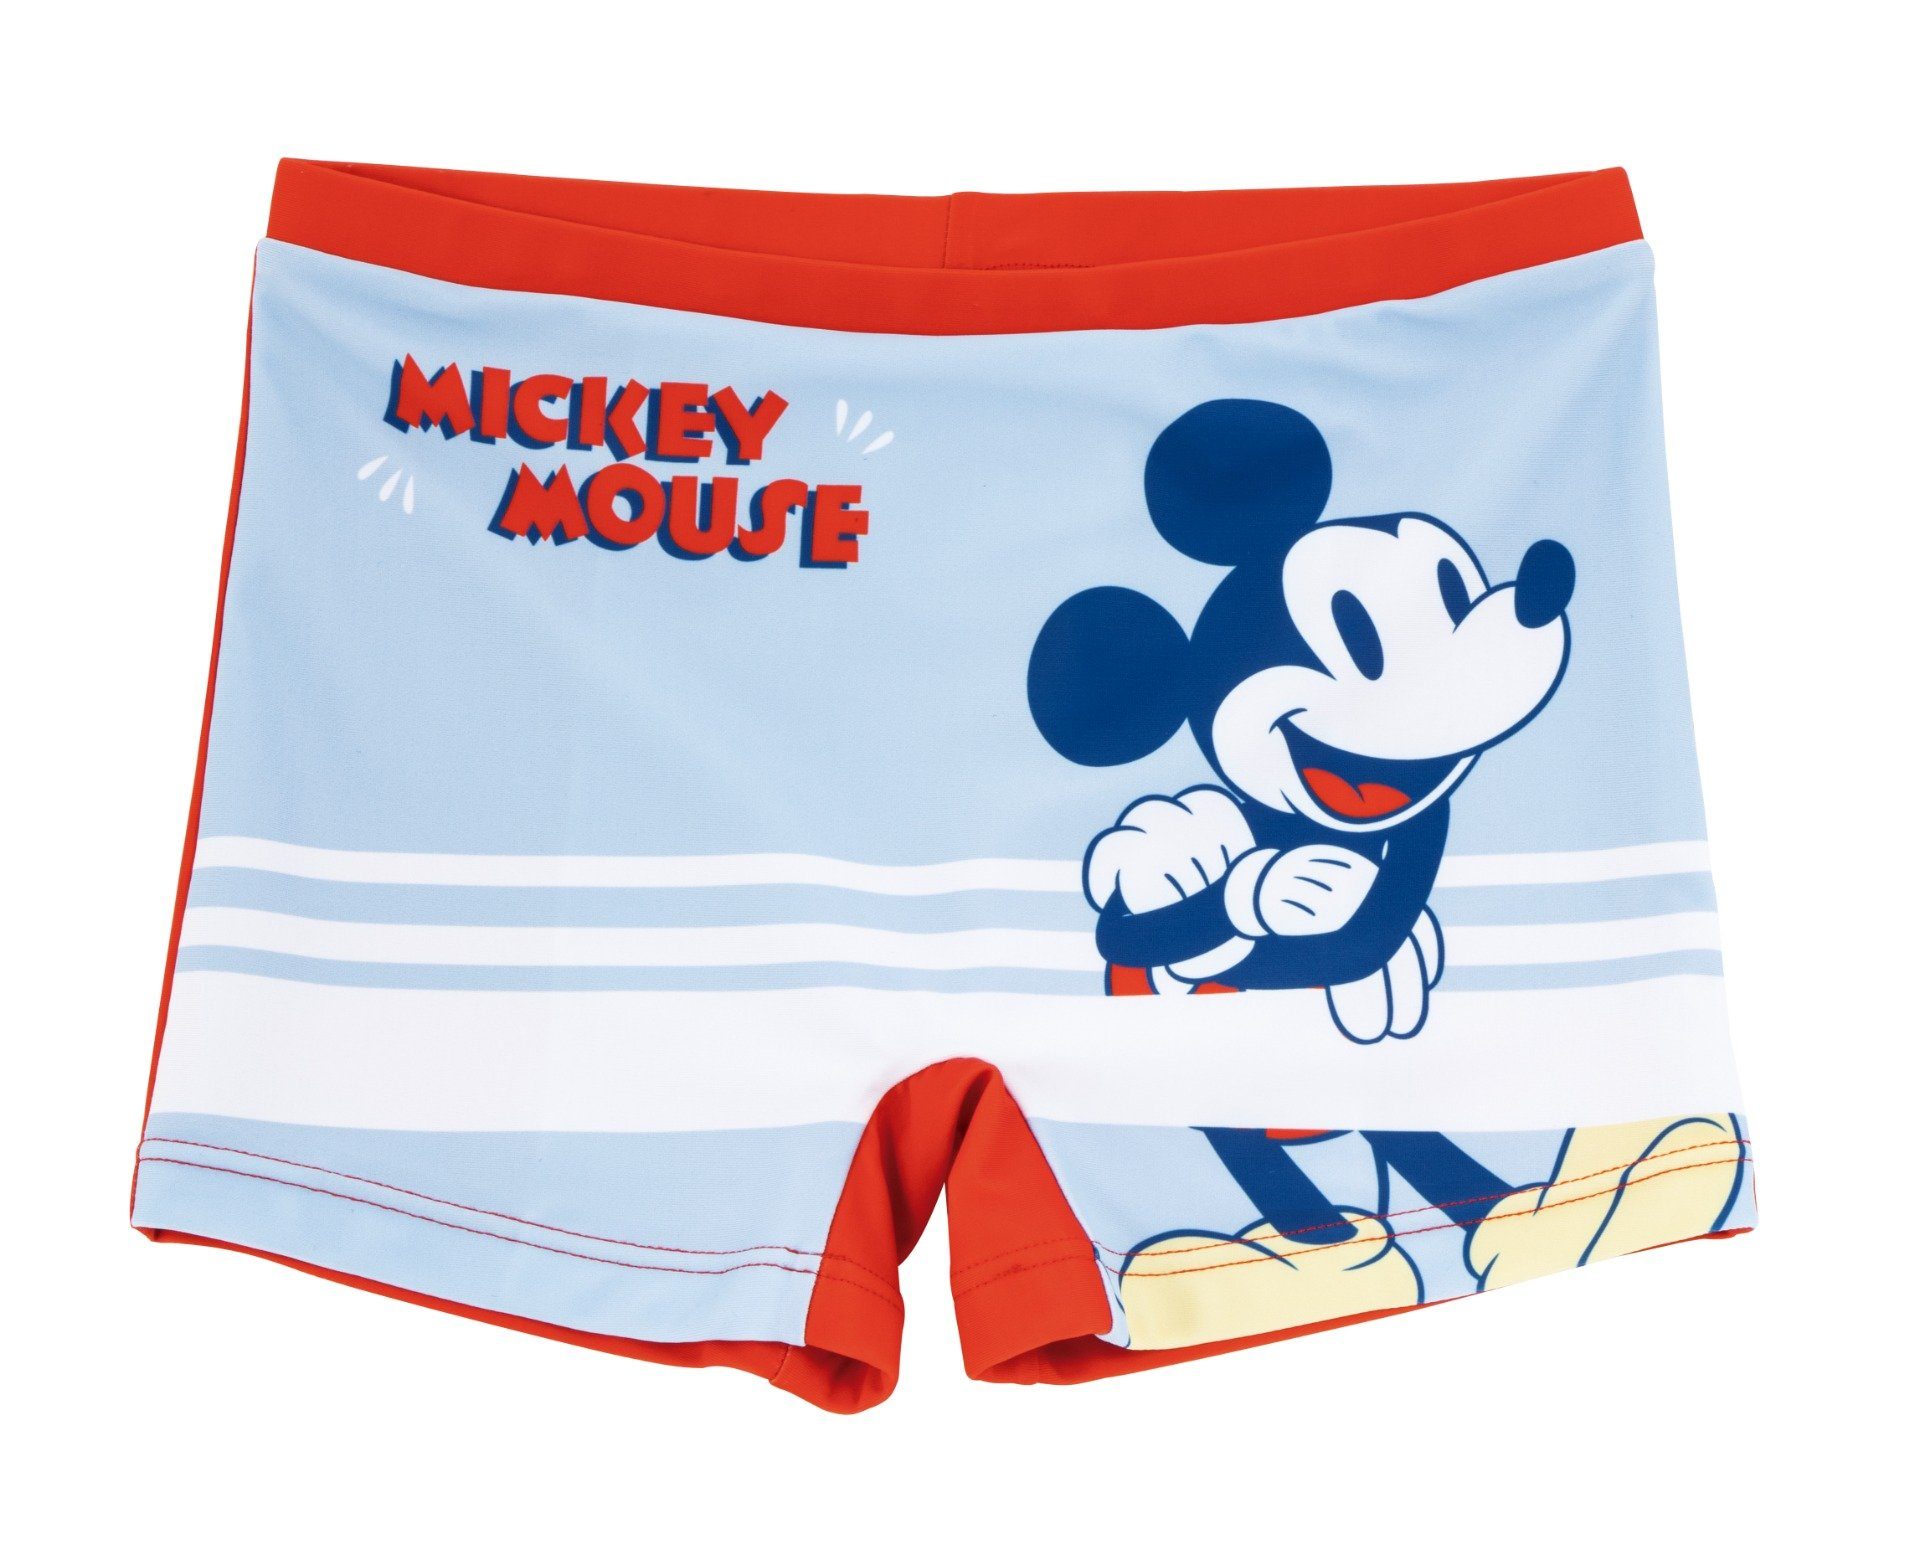 Disney Mickey Mouse Badepants Mickey Maus Jungen Kinder Badehose Gr. 104 bis 128 Rot